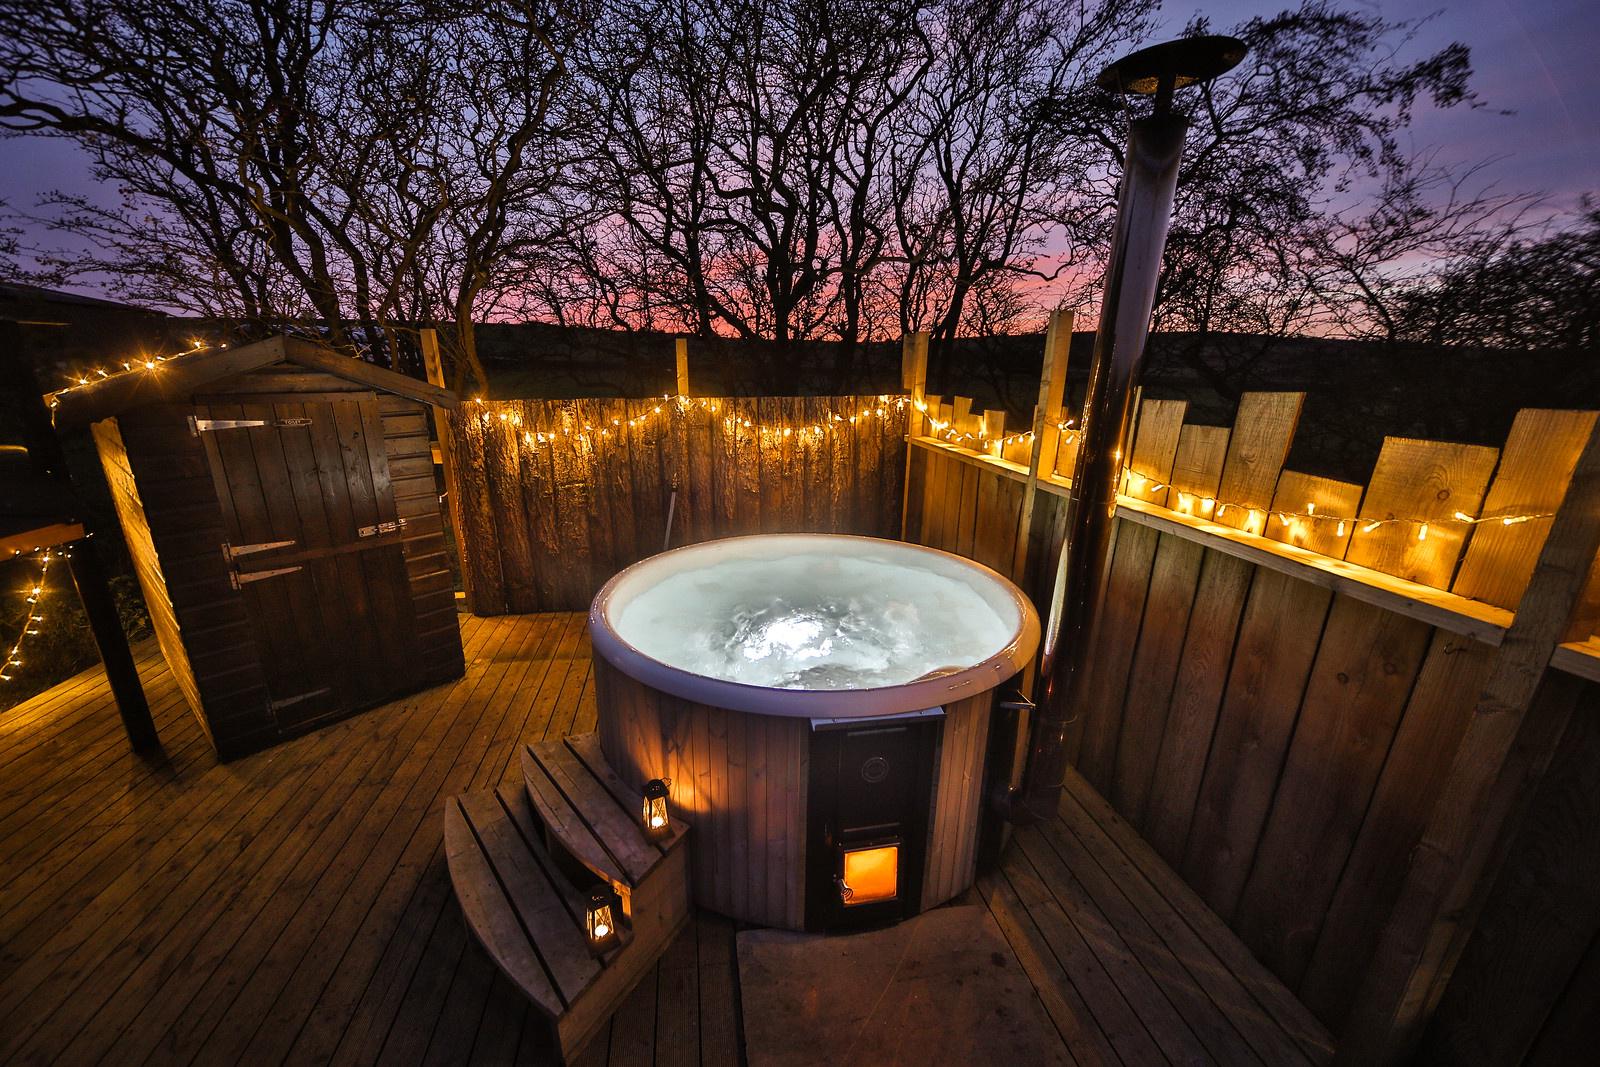 Glamping Sites With Hot Tubs | The Best Hot Tub Glamping Sites